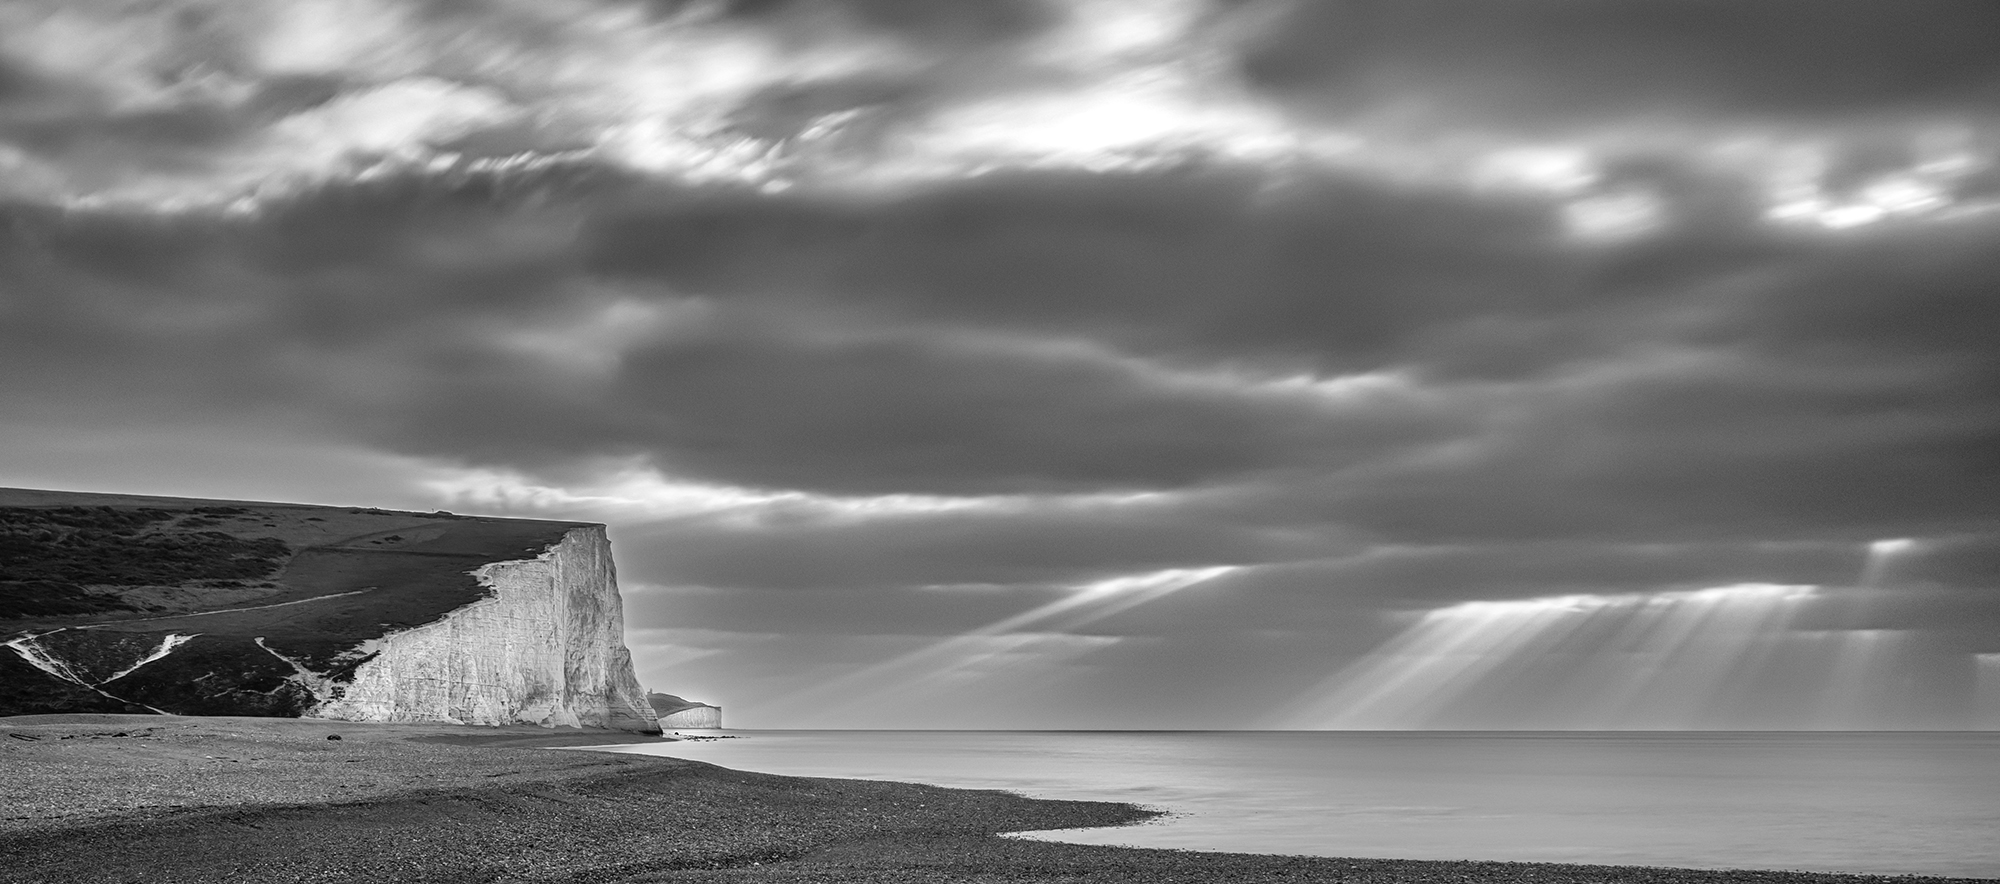 Rays Of Light By Keith Surey